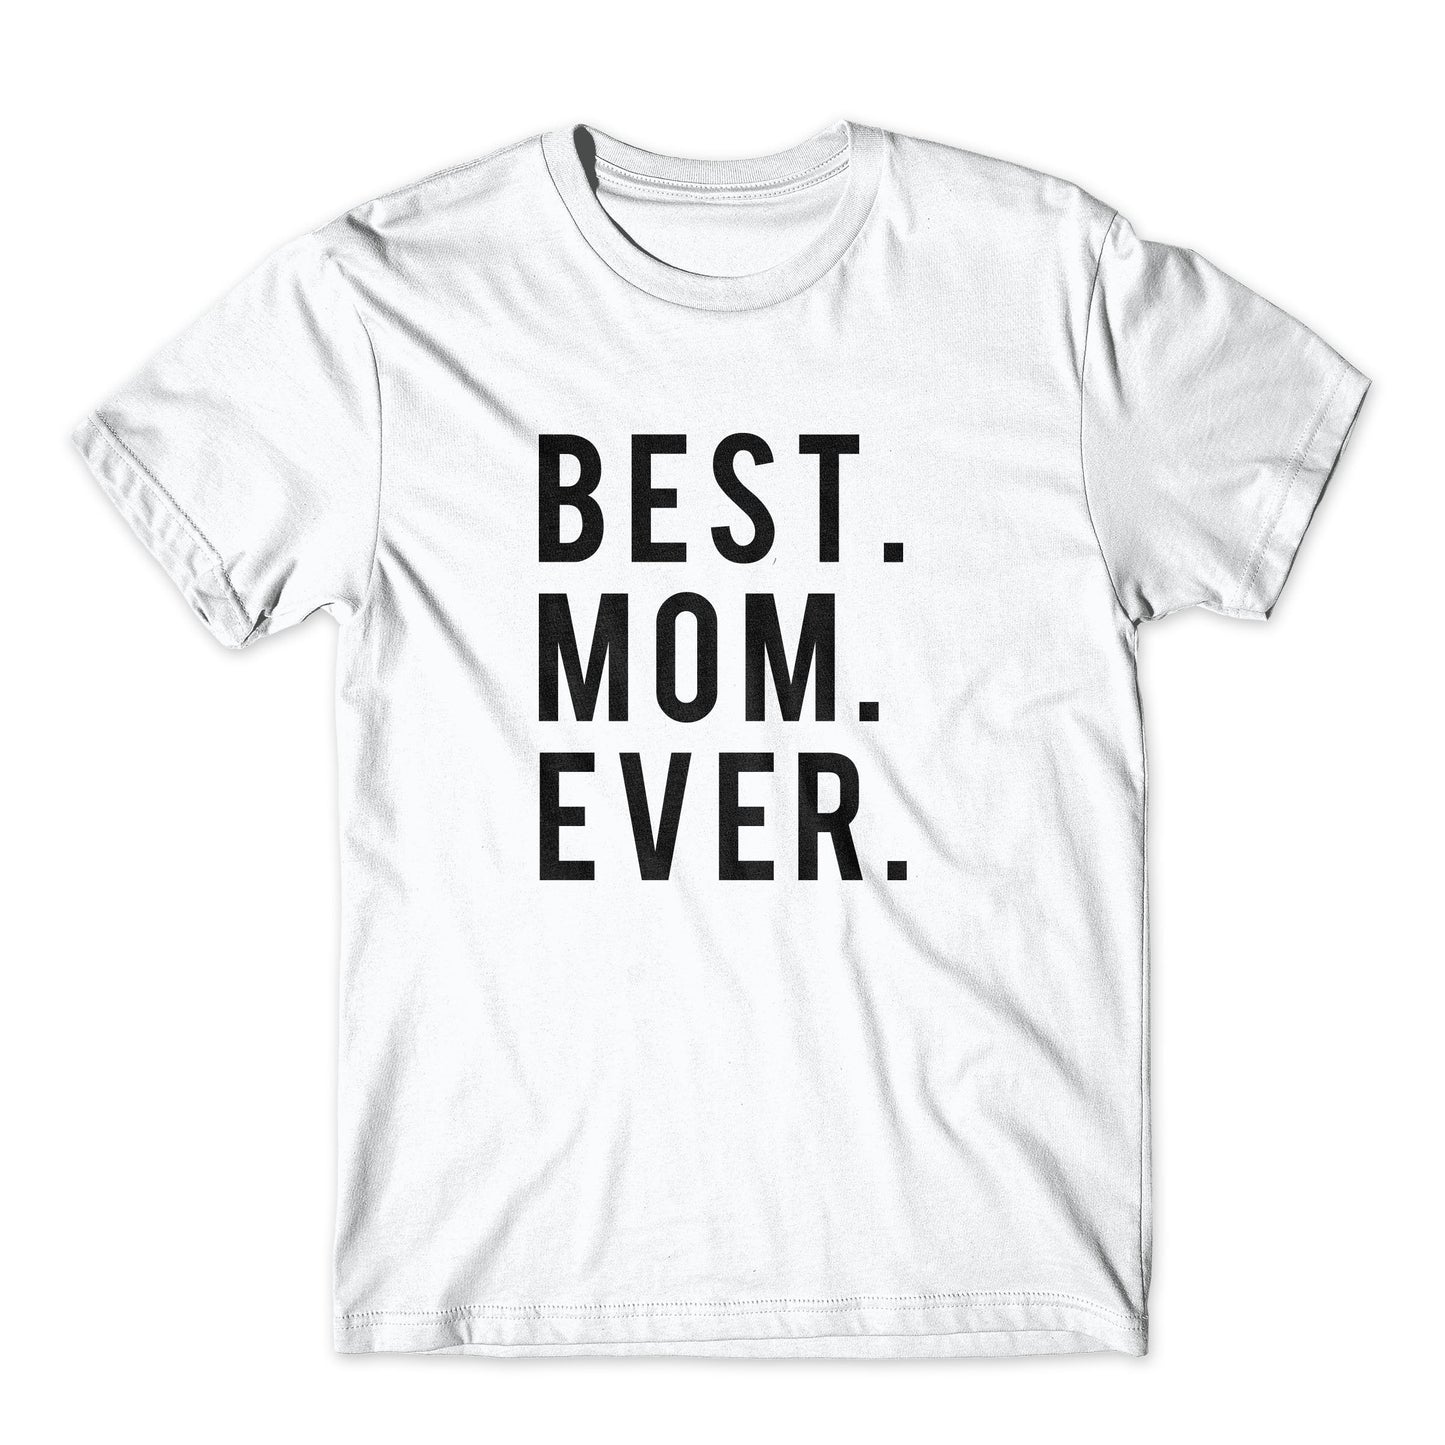 Best. Mom. Ever. On Black, White, or Gray Soft Cotton  Premium Shirt. Mother's Day Gift for Mom. Comfy!